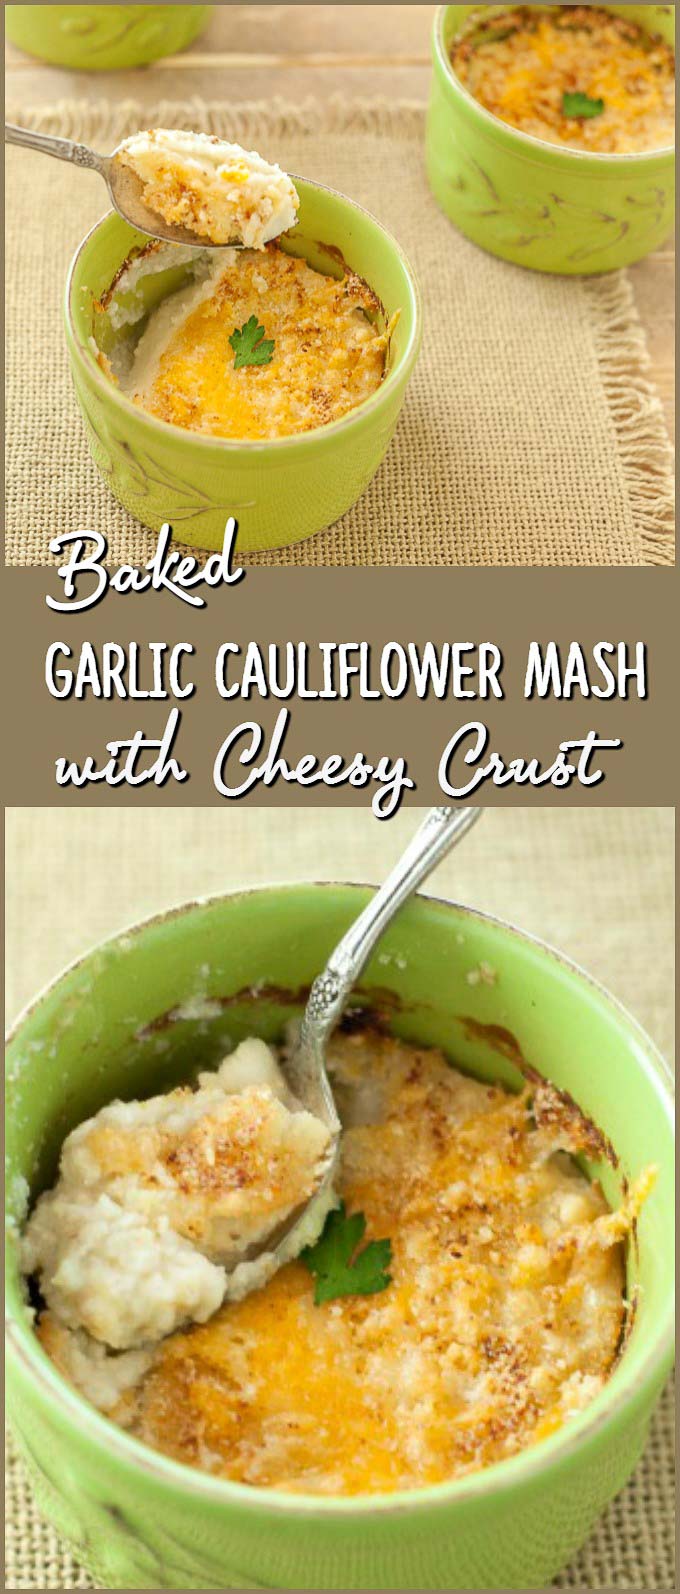 Baked Garlic Cauliflower Mash with Cheese Crust - Super tasty, Low carb, gluten free, primal and healthy